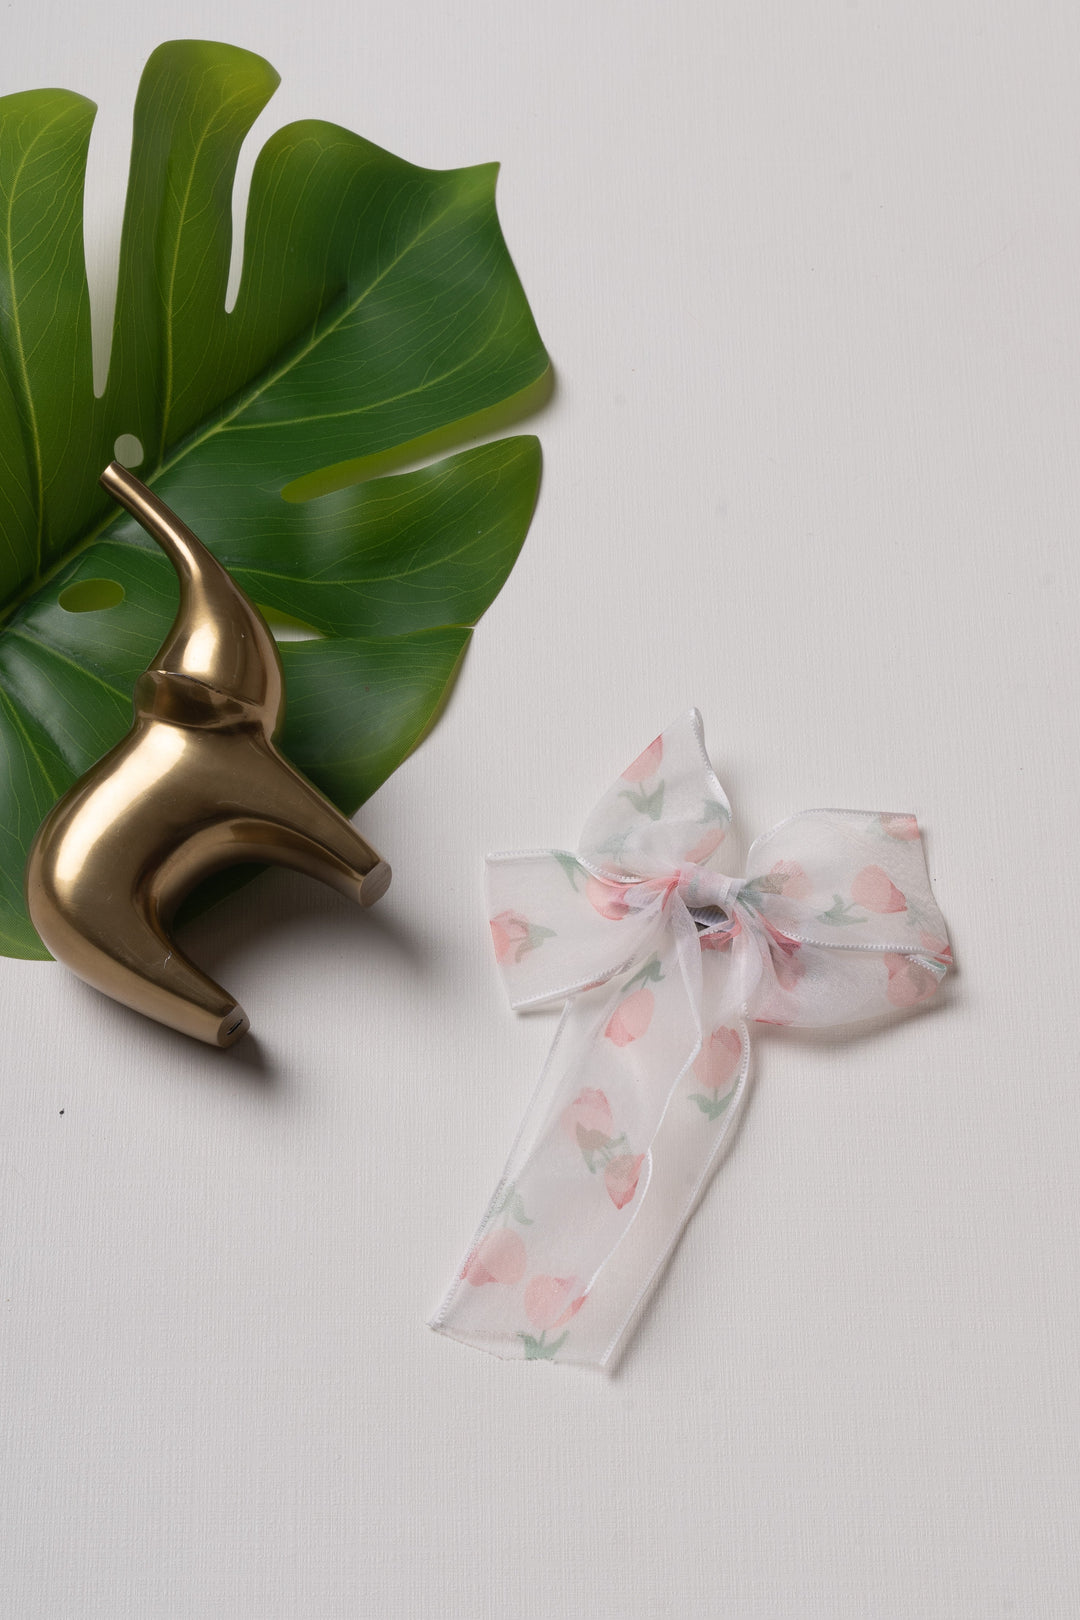 The Nesavu Hair Clip Petite Garden Bow Clip - The Perfect Finishing Touch for Her Tresses Nesavu White JHCL71C Adorable White Bow Hair Clip with Pink Floral Design for Stylish Girls | The Nesavu